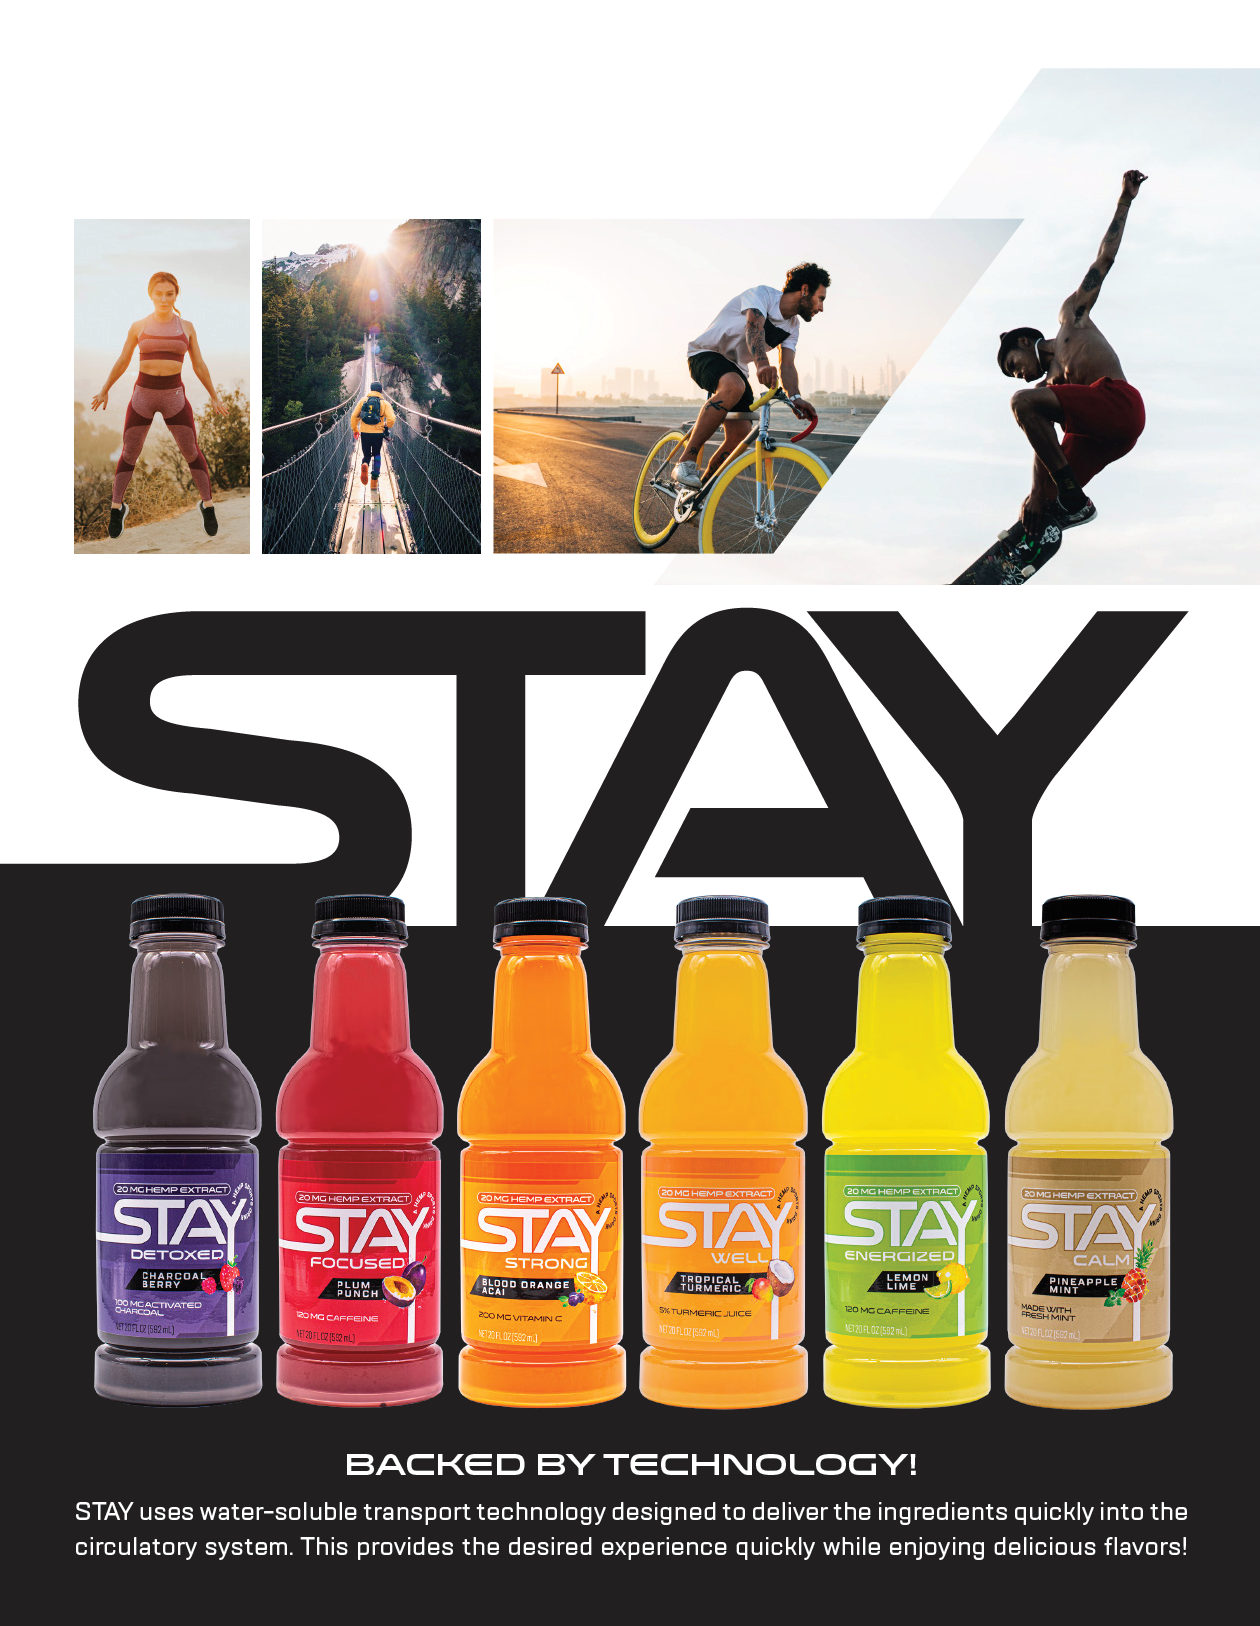 Greene Concepts Acquires Stay Hemp 4 Life LLC as a Wholly Owned Subsidiary to Offer Hemp Infused Formulated Drinks for Entry Into $22 Billion Sports Drink Market